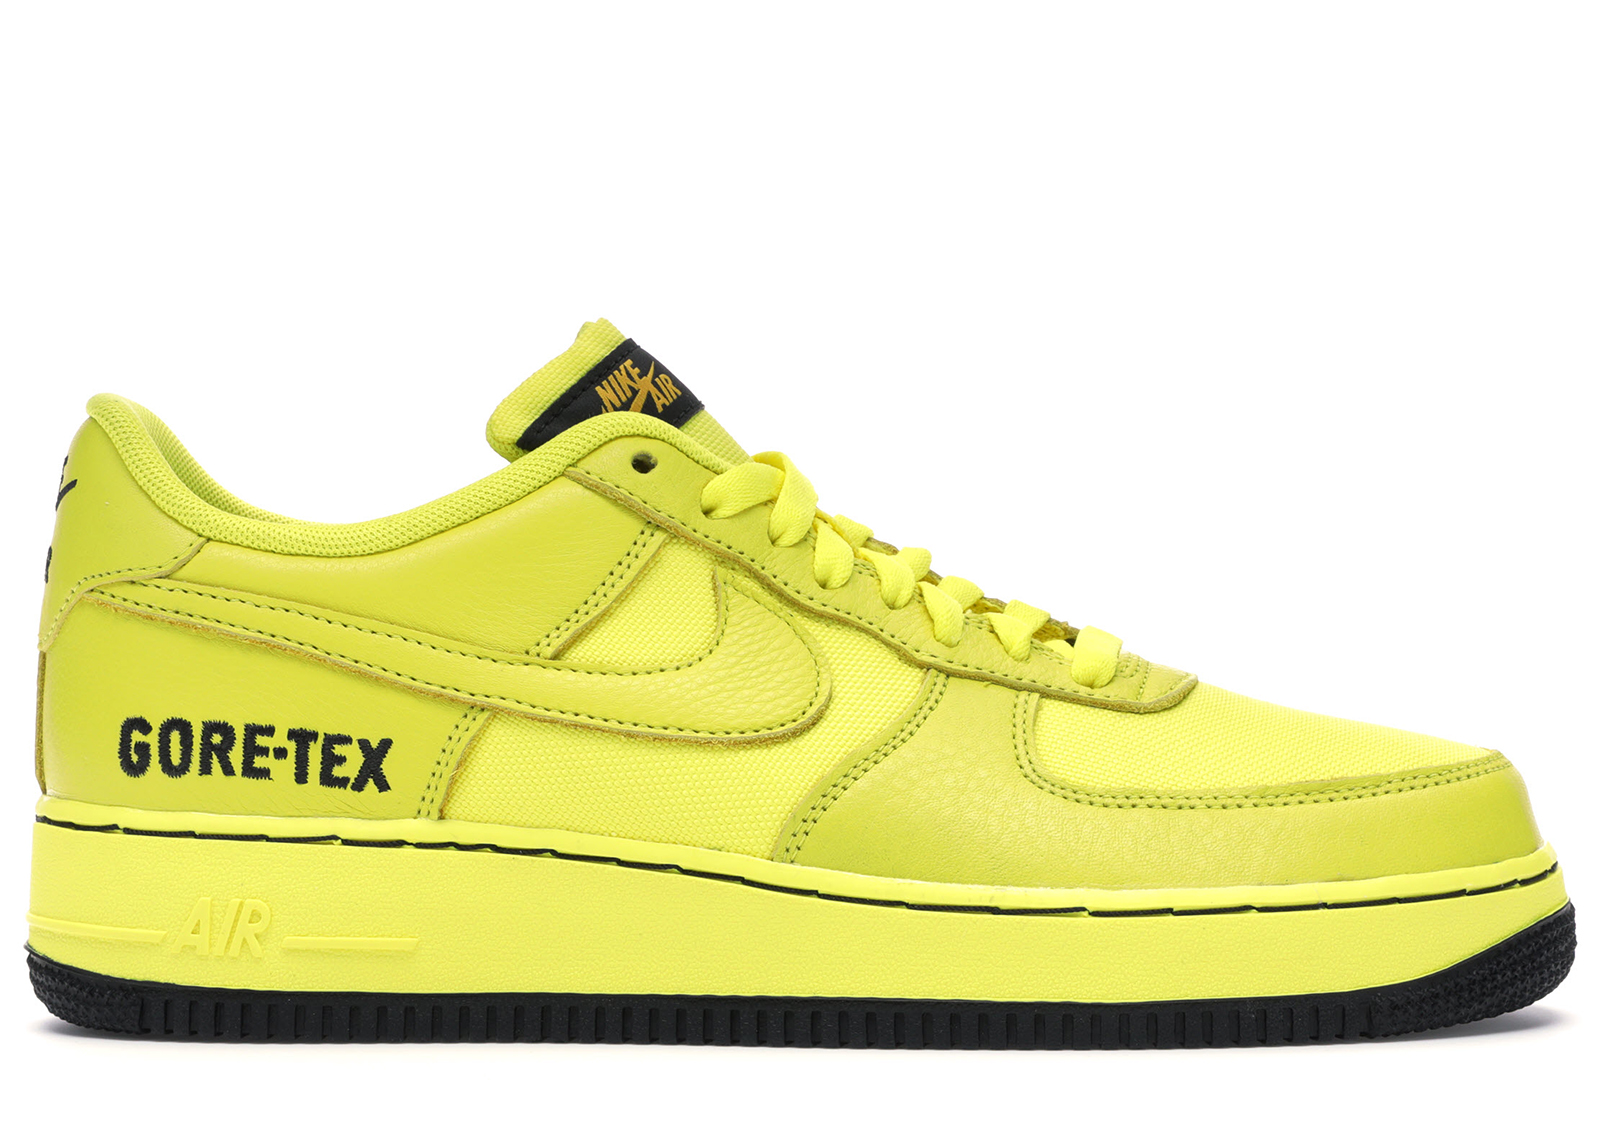 Nike Air Force One Low Gore-Tex Dynamic Yellow